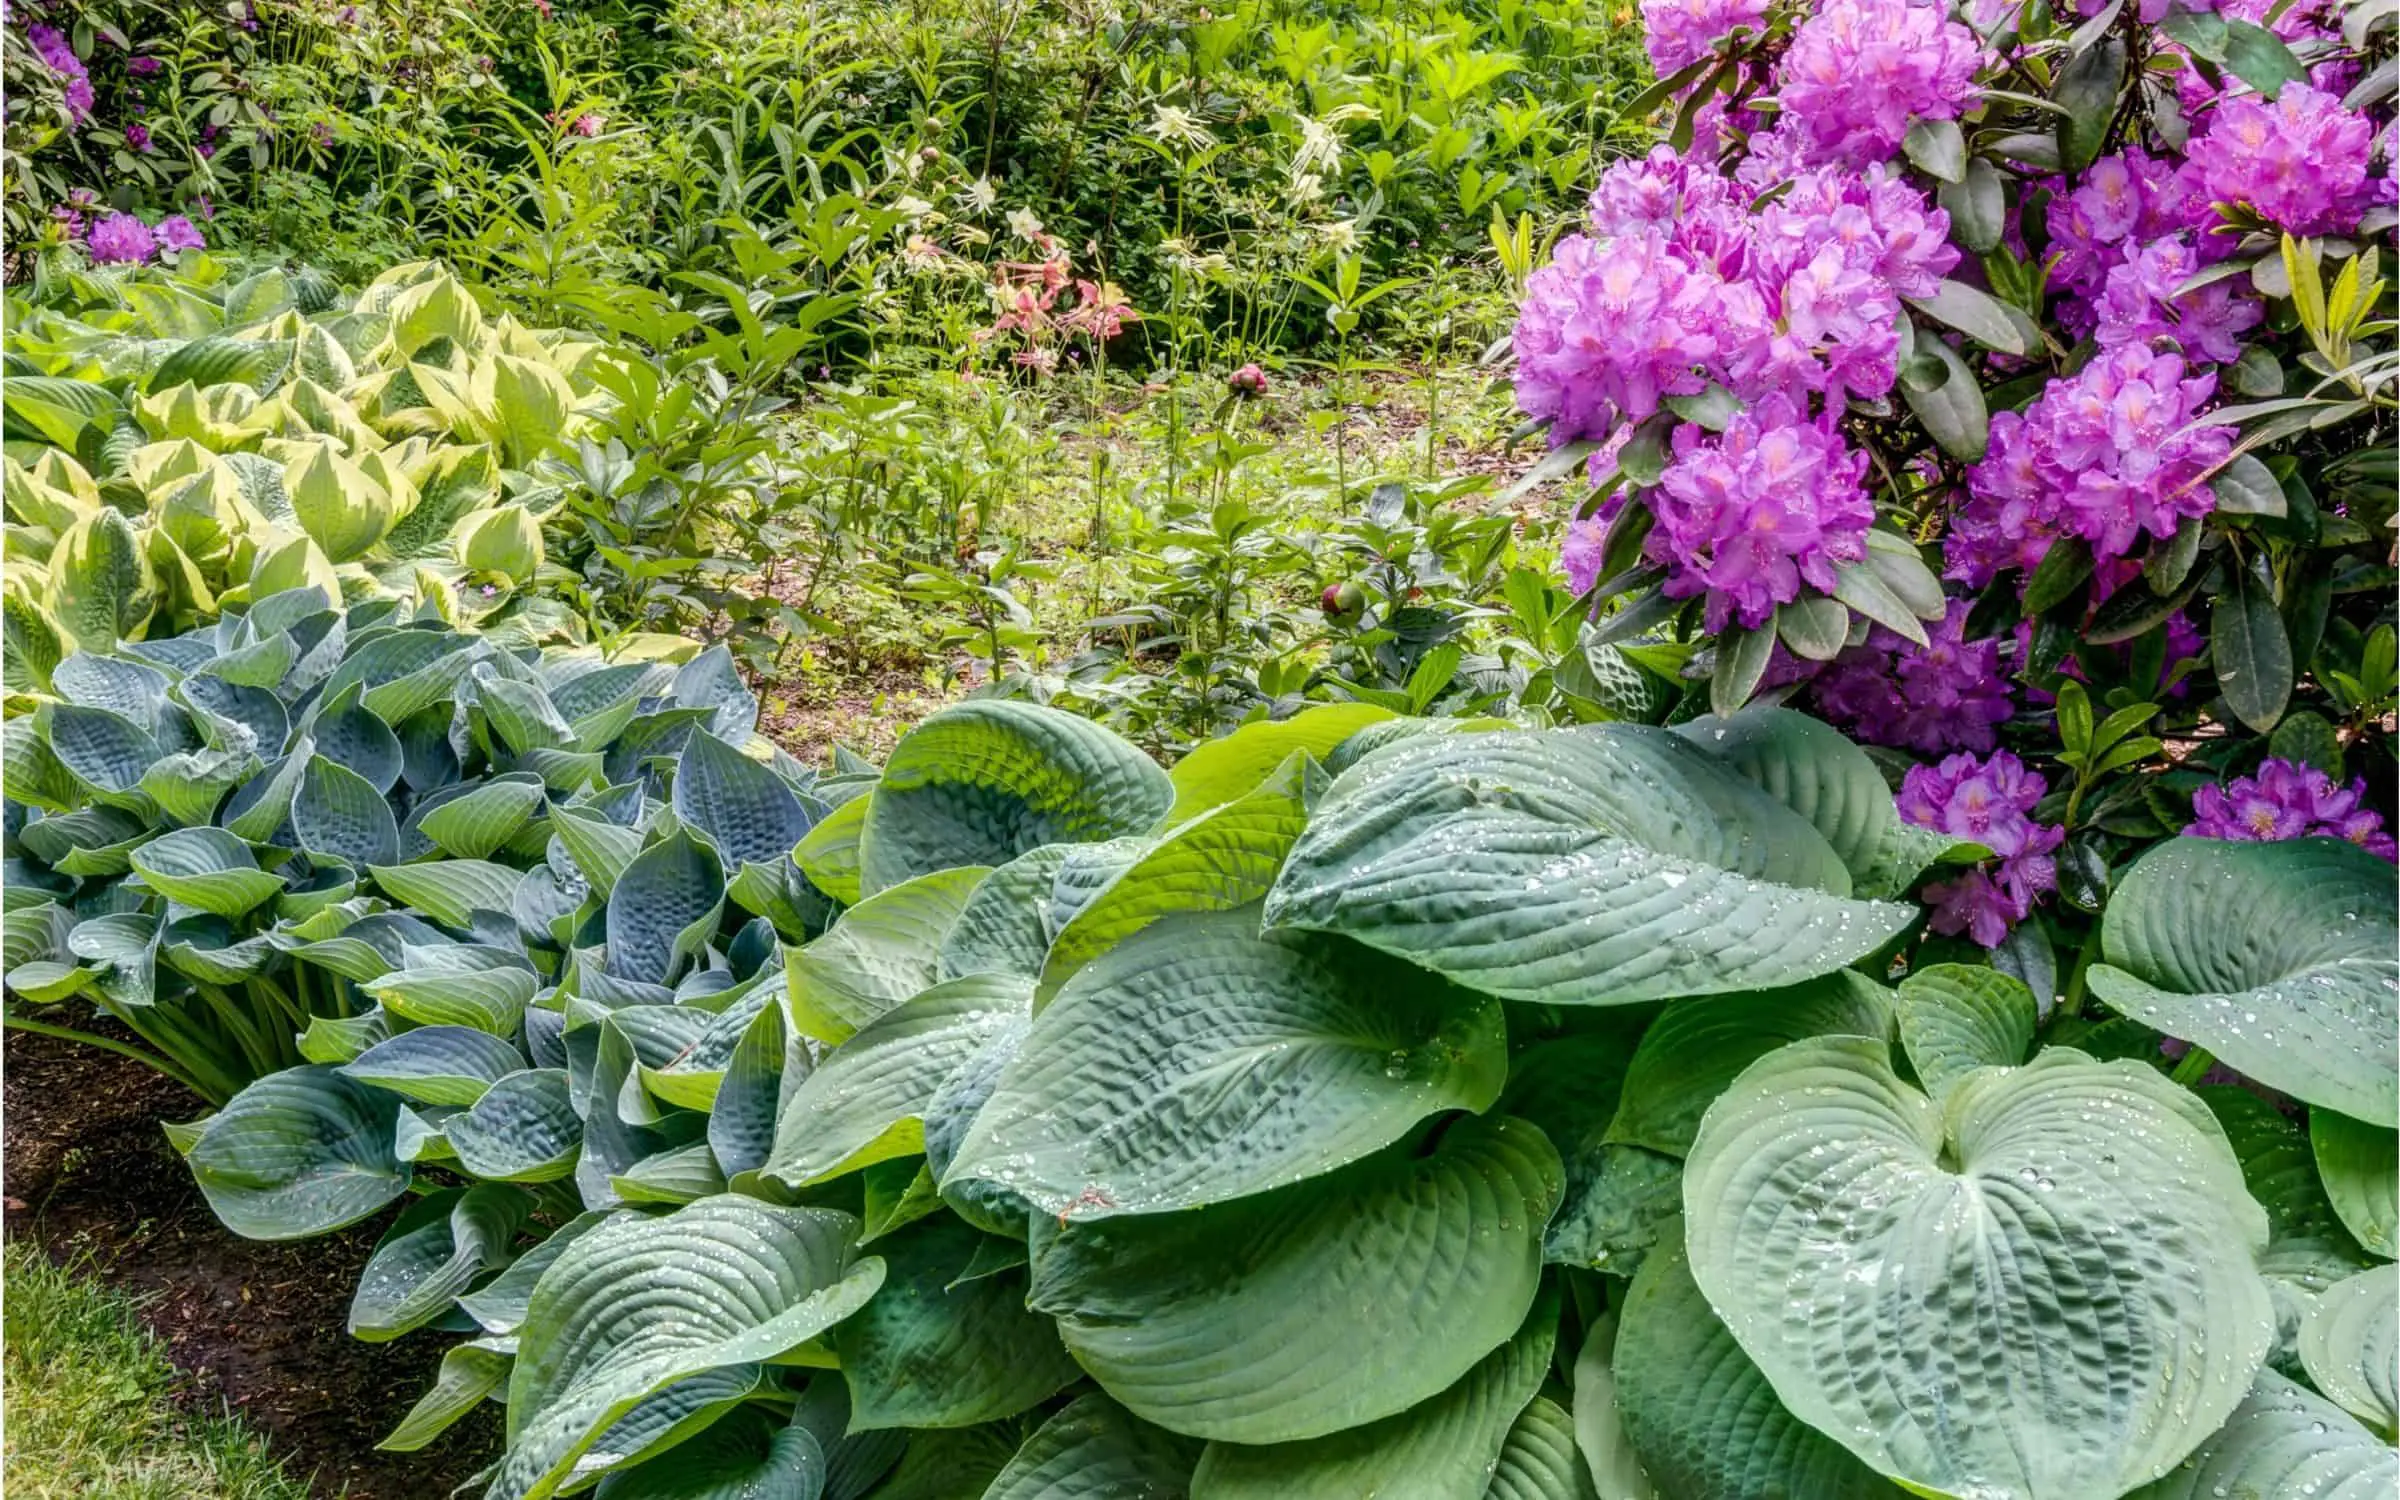 Hostas and rhododendron along the edge of the lawn